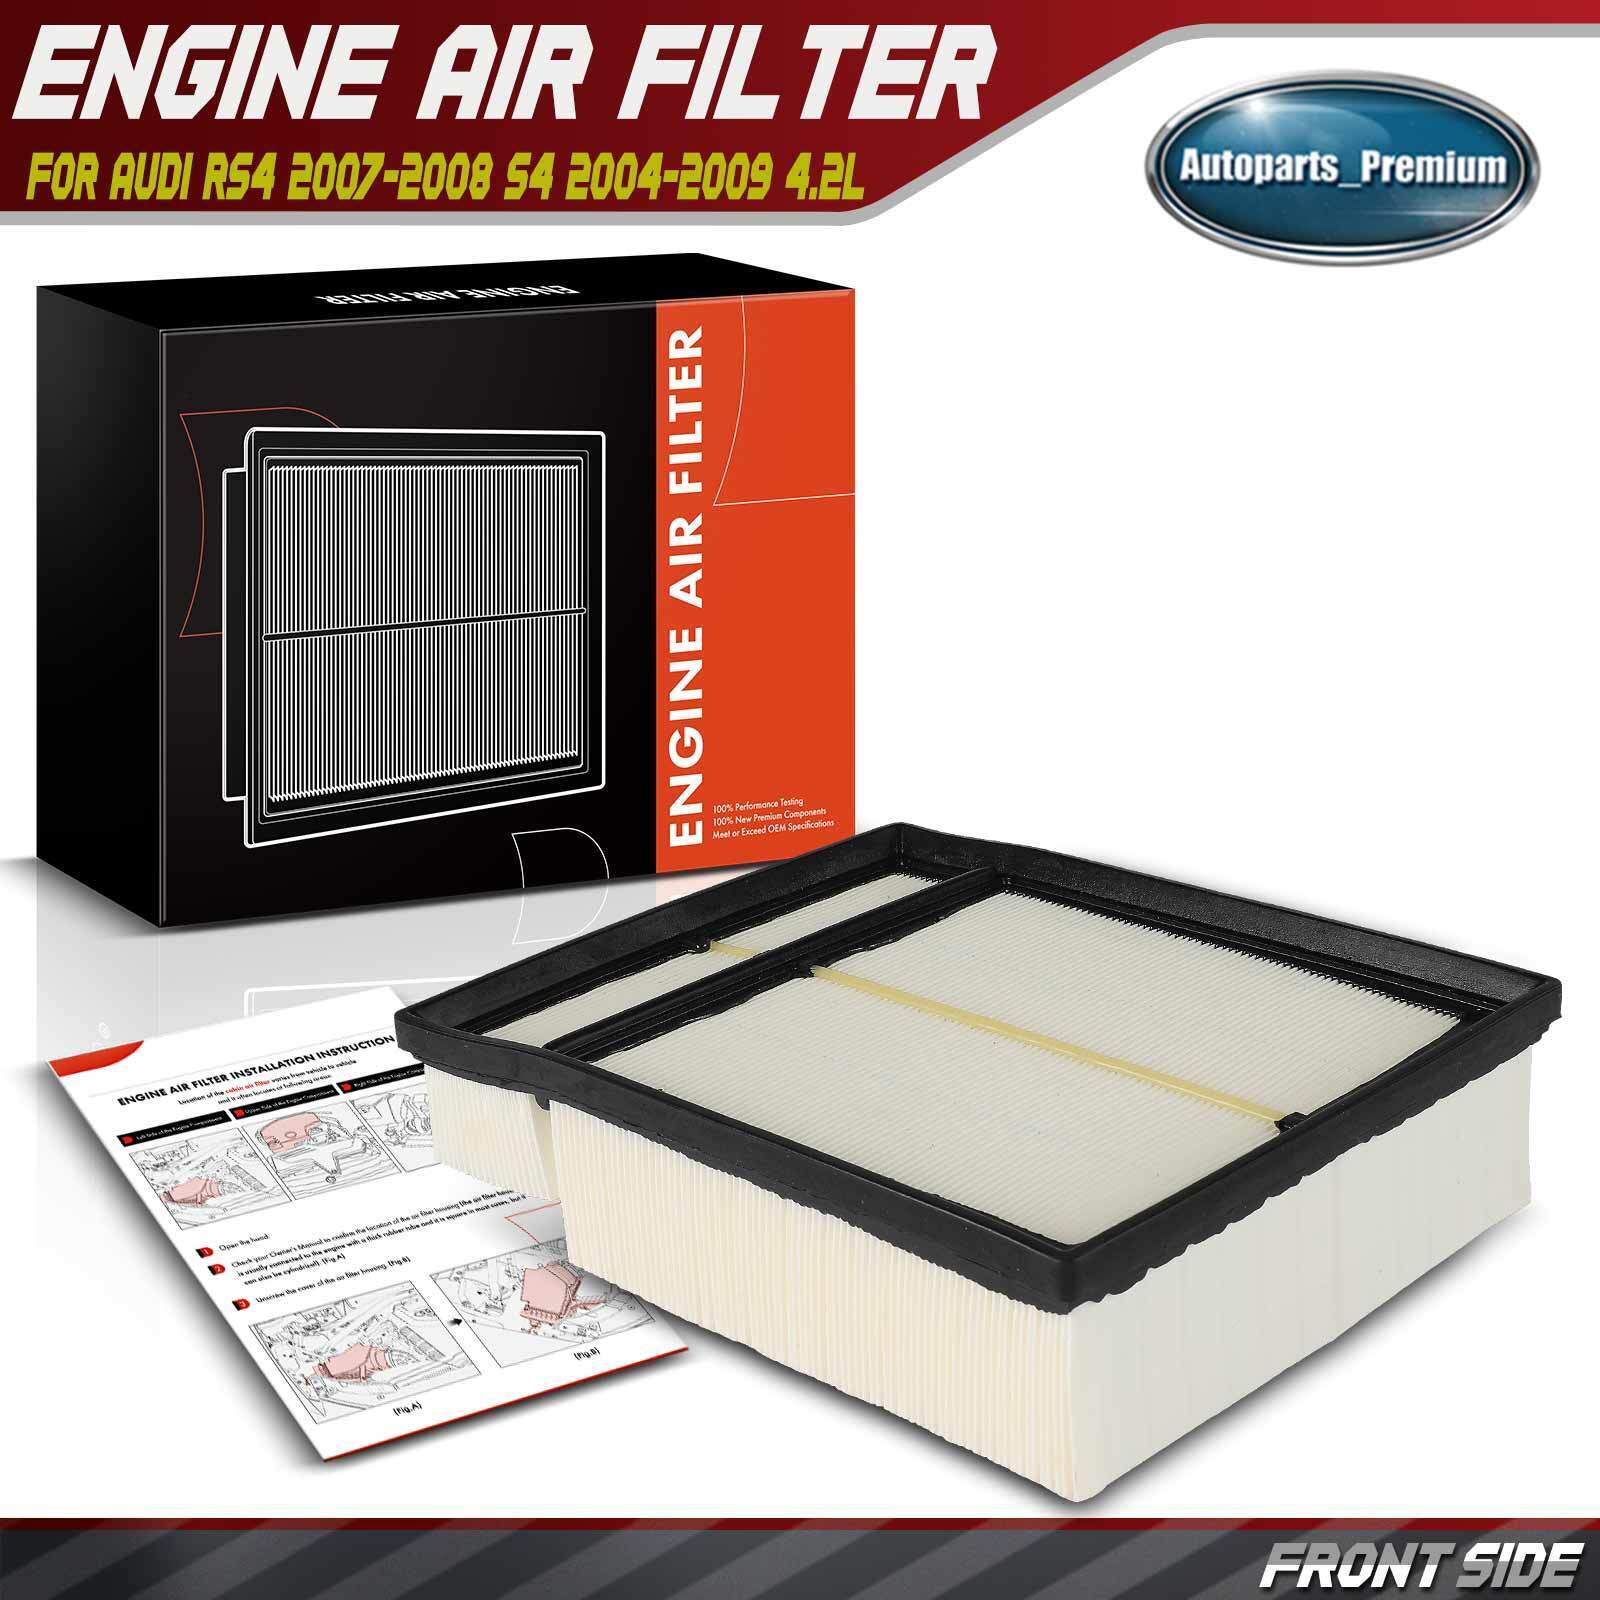 New Engine Air Filter for Audi RS4 2007-2008 S4 2004 2005 2006 2007-2009 V8 4.2L